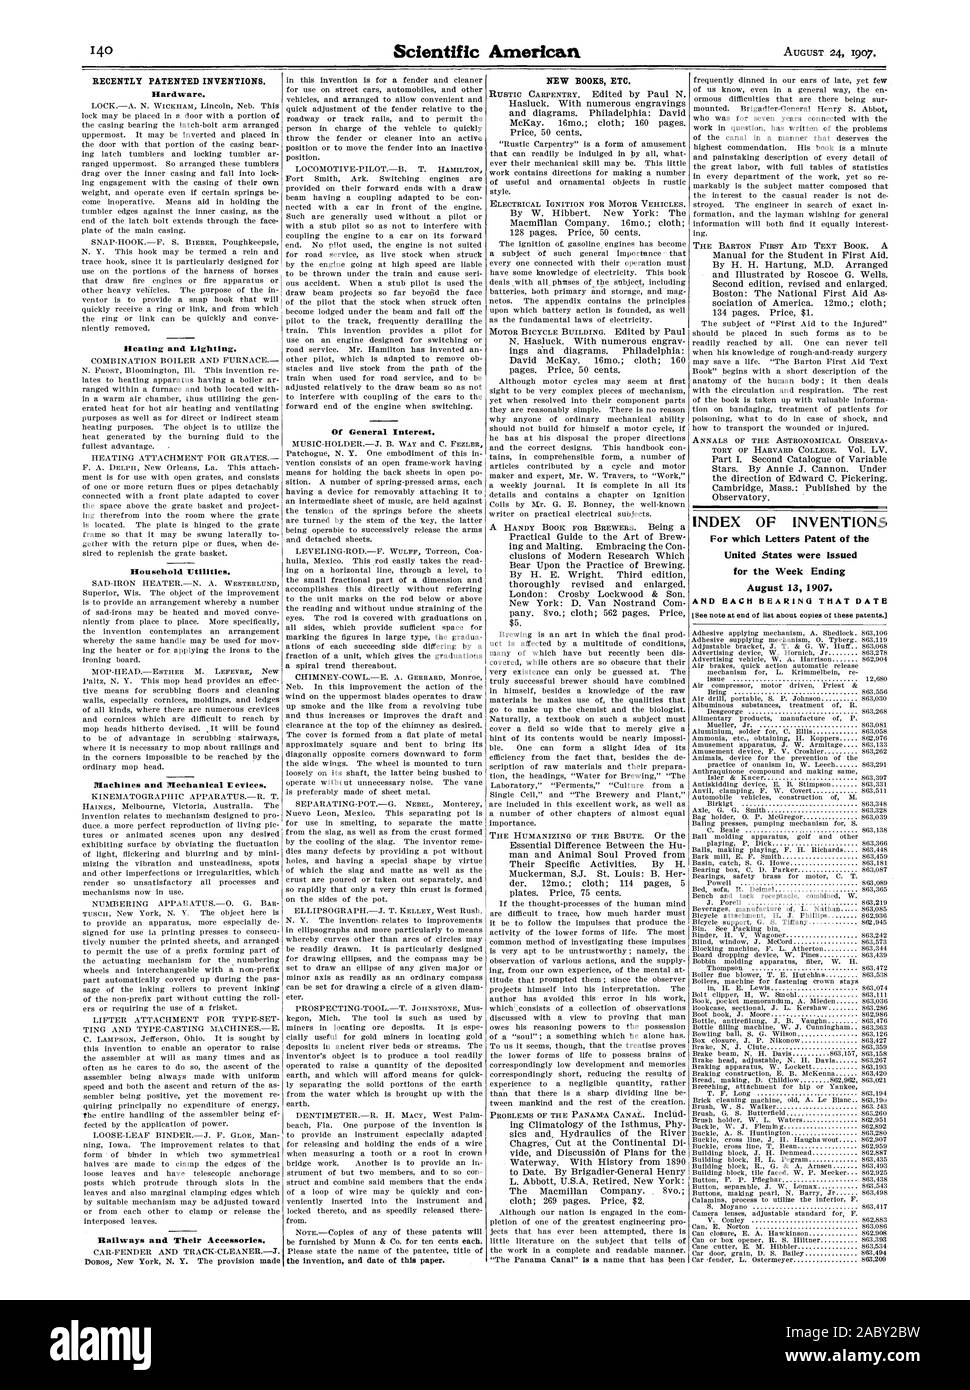 Hardware. Heating and Lighting. Household Utilities. Railways and Their Accessories. Of General Interest. INDEX OF INVENTIONS For which Letters Patent of the United States were Issued for the Week Ending August 13 1907., scientific american, 1907-08-11 Stock Photo